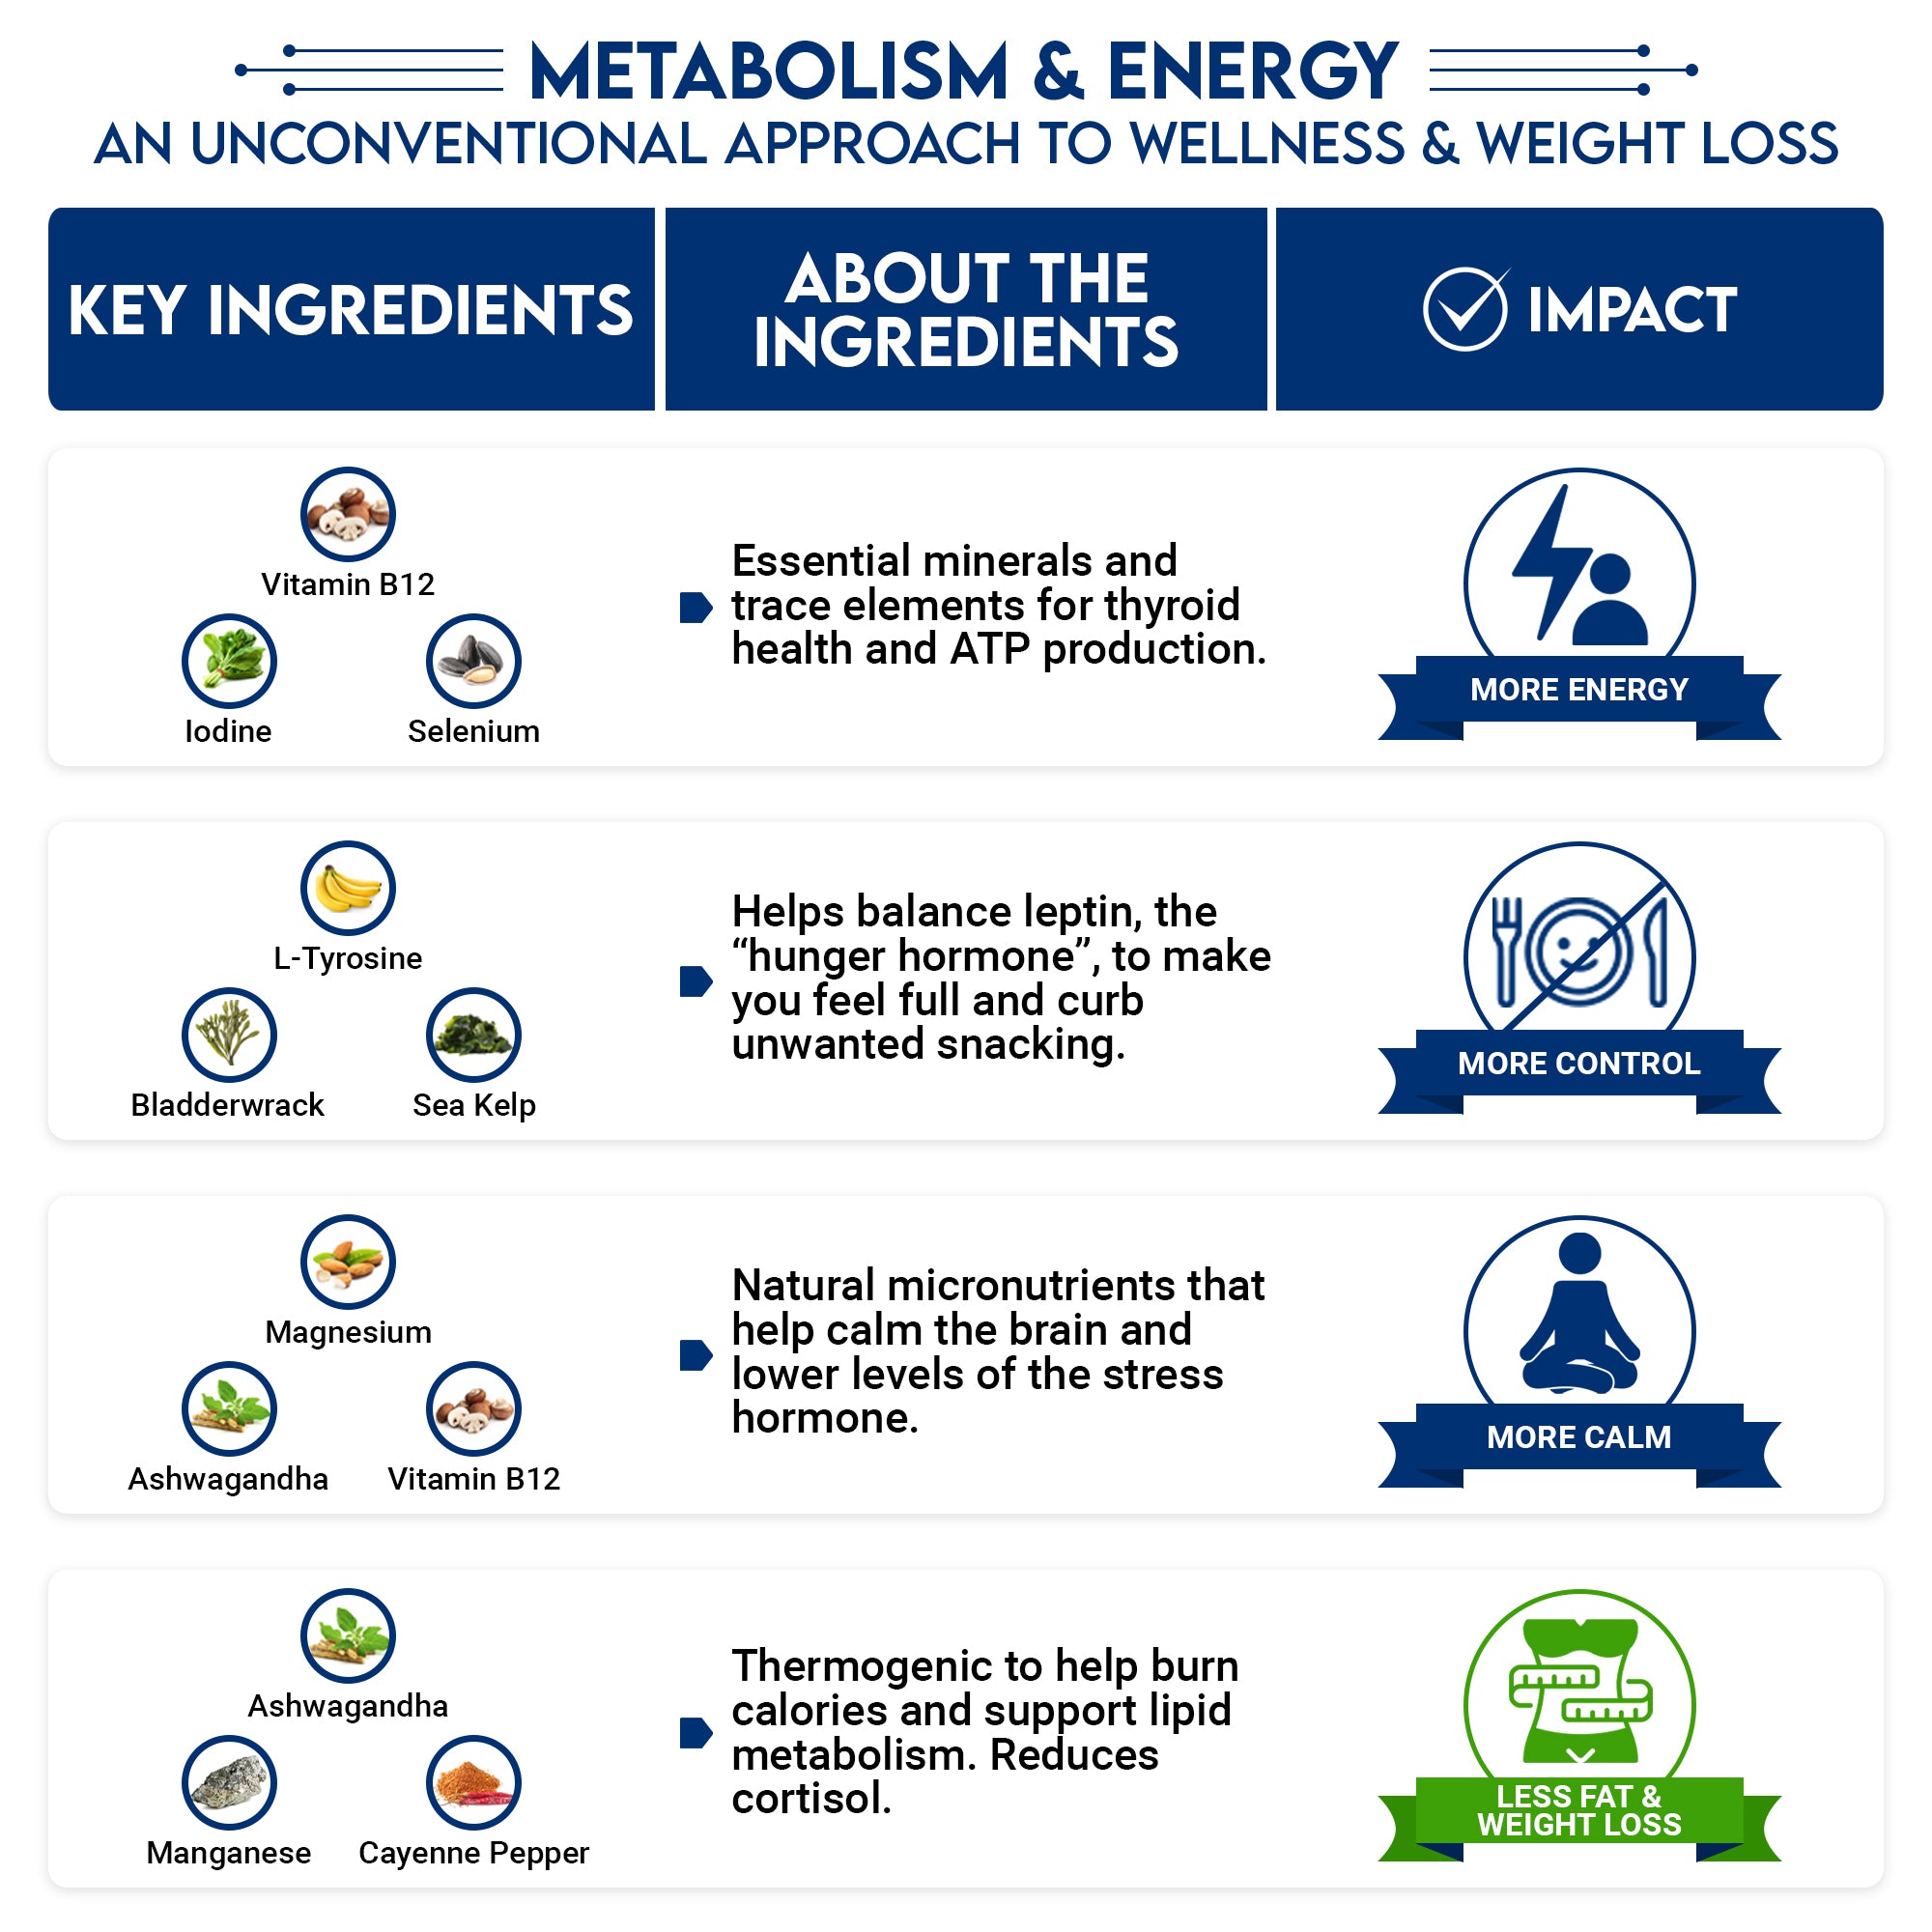 METABOLISM AND ENERGY